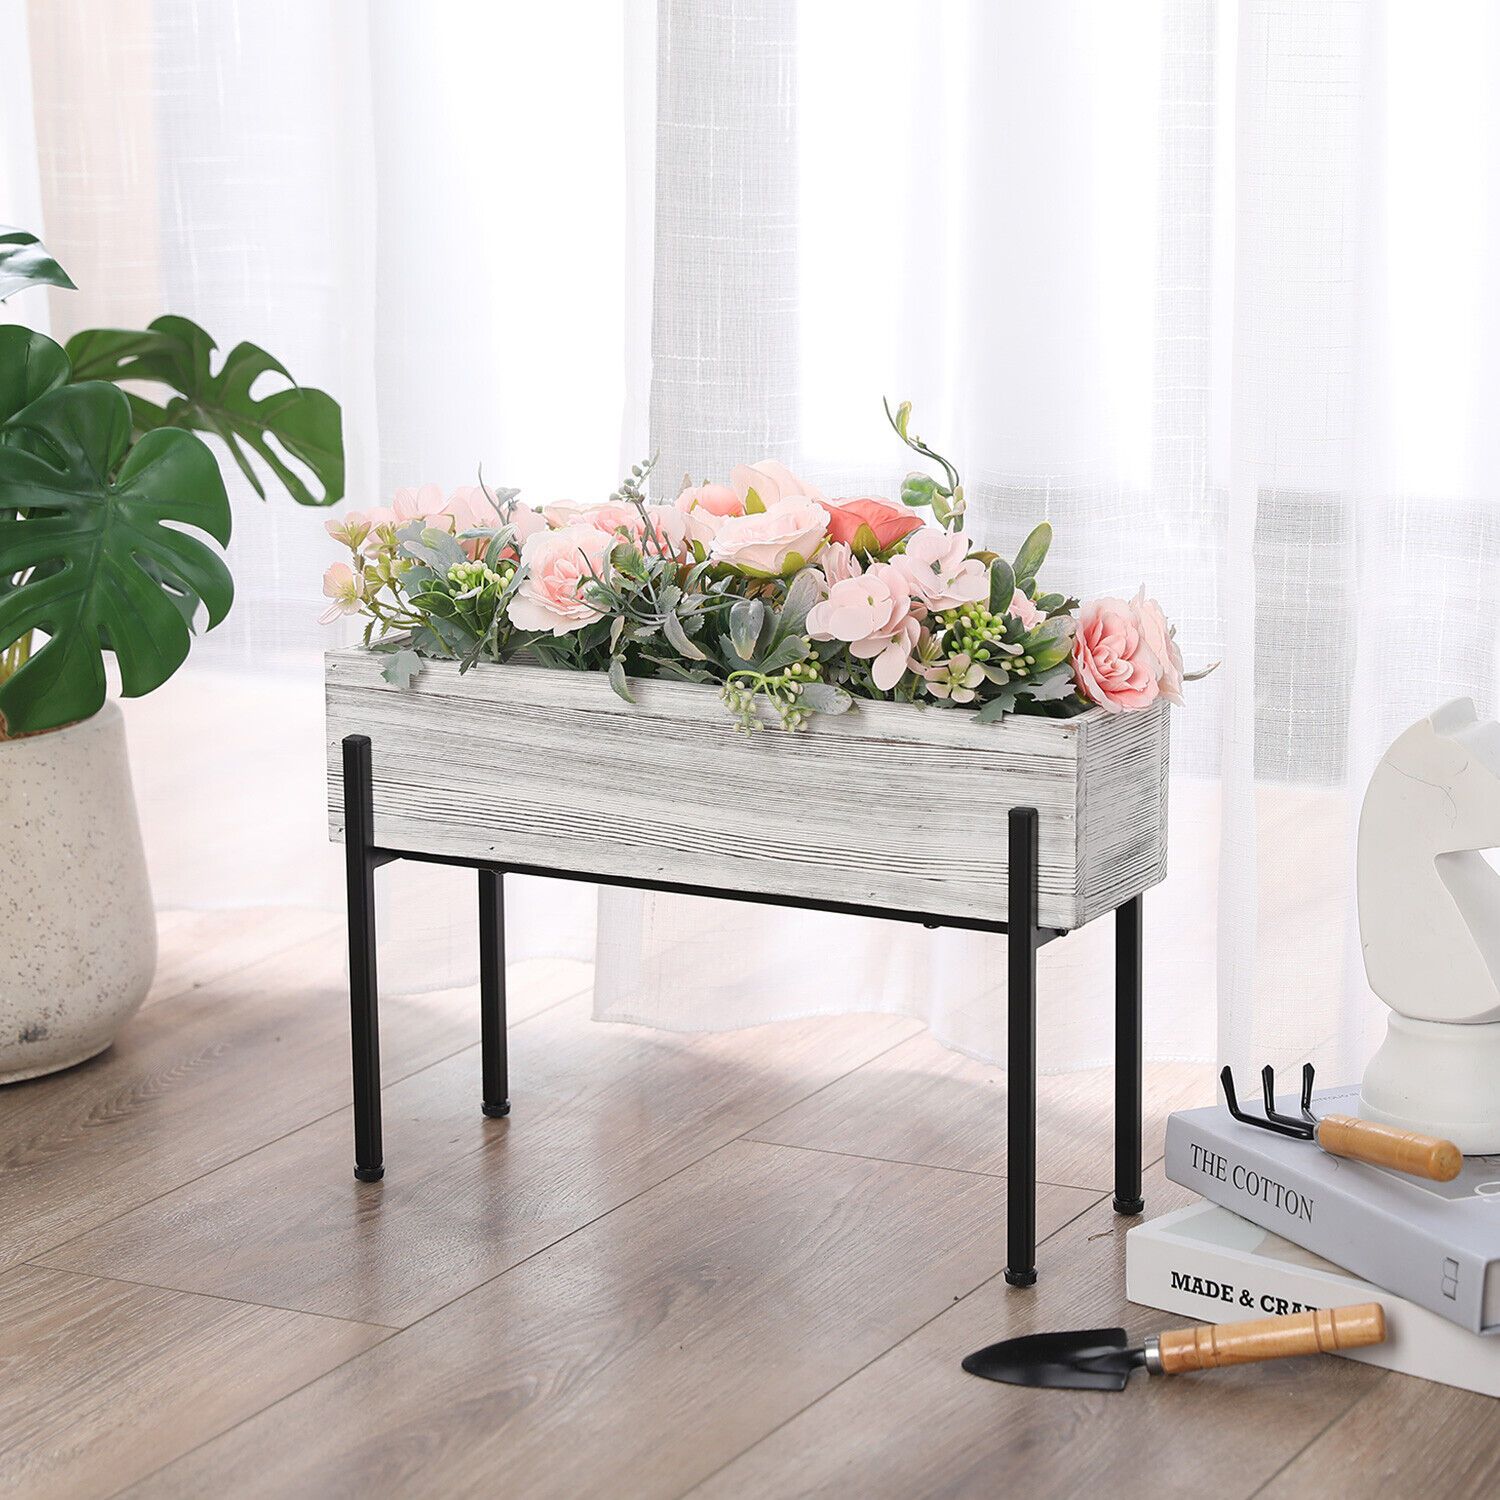 Whitewashed Wood Standing Planter Box, Raised Trough Style Indoor Plant  Holder | Ebay Throughout Plant Stands With Flower Box (View 3 of 15)